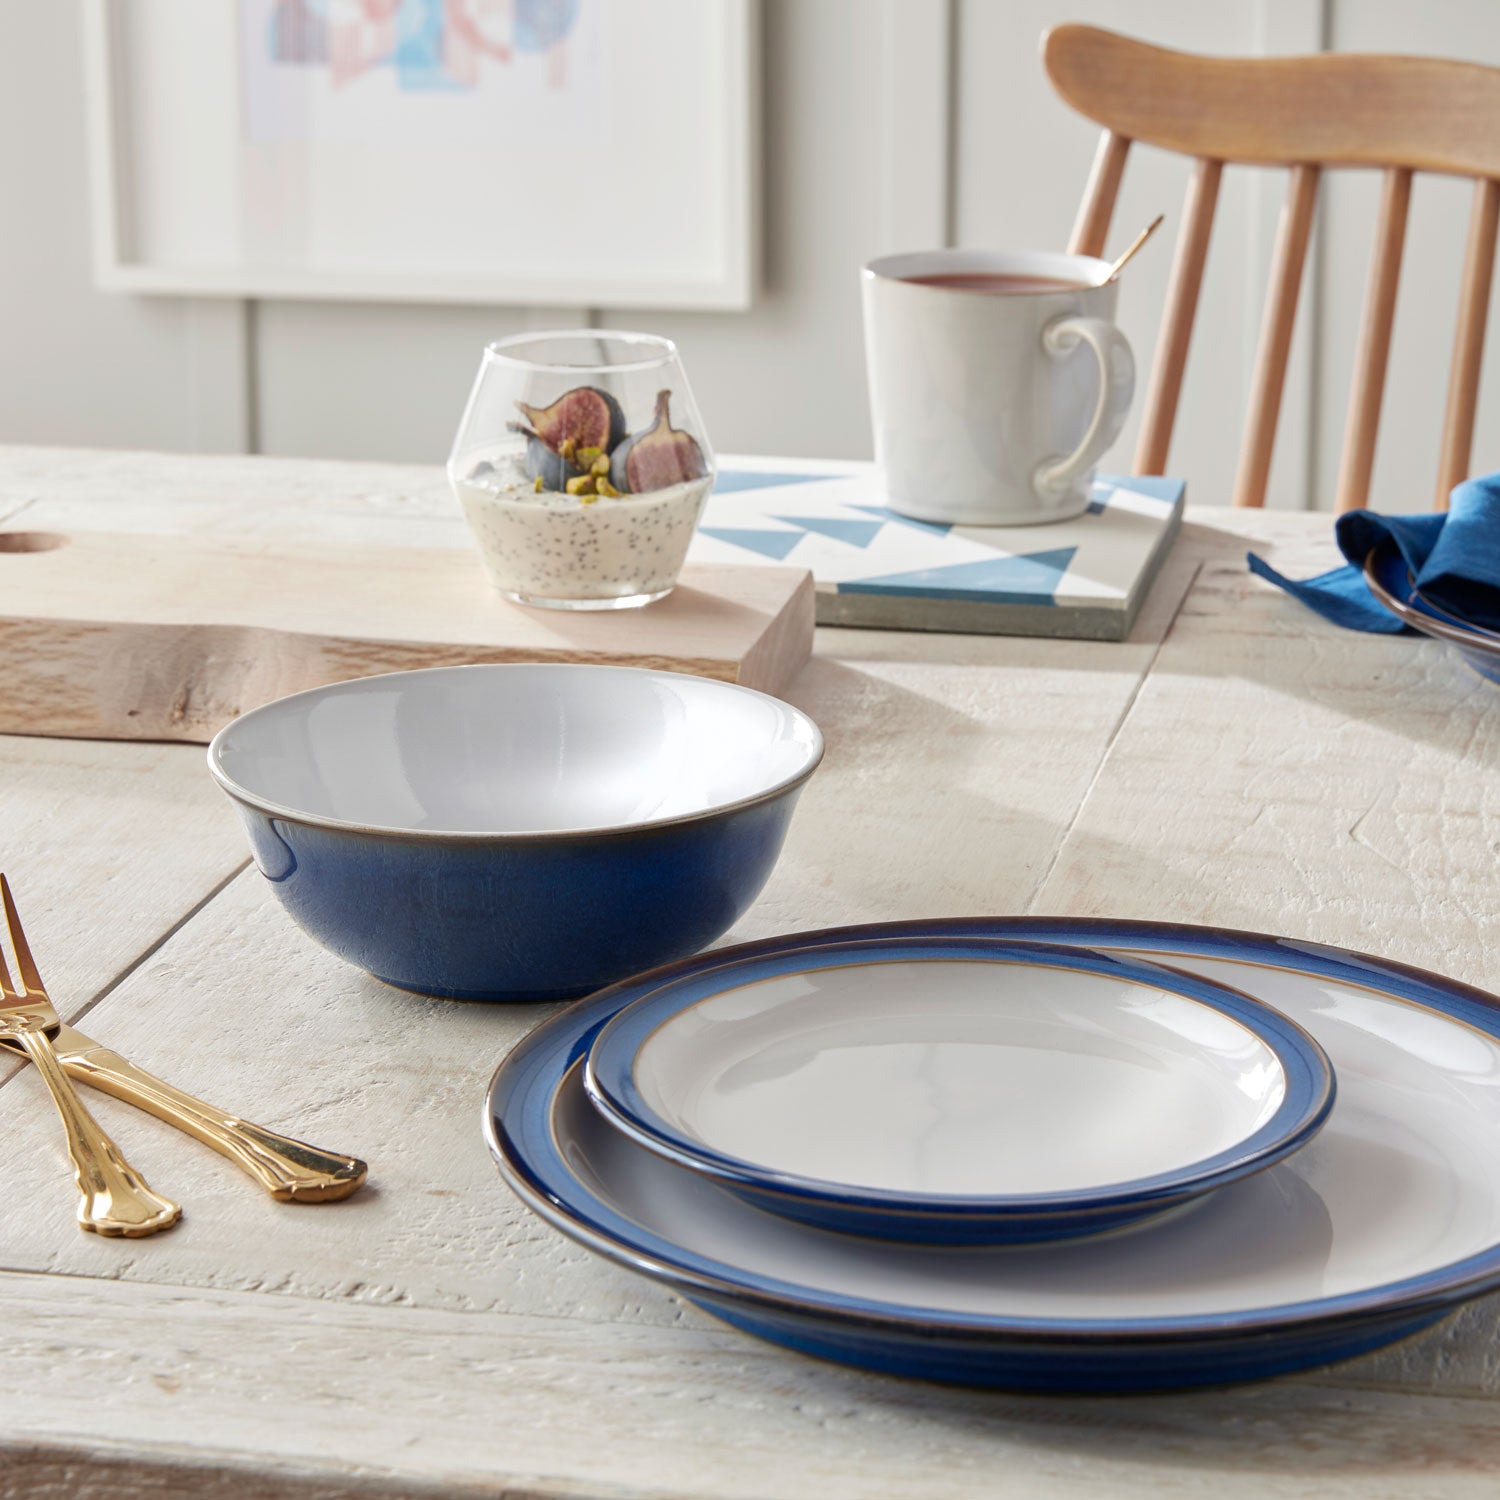 Denby 12 Piece Tableware Set - Imperial Blue 4 Shaws Department Stores